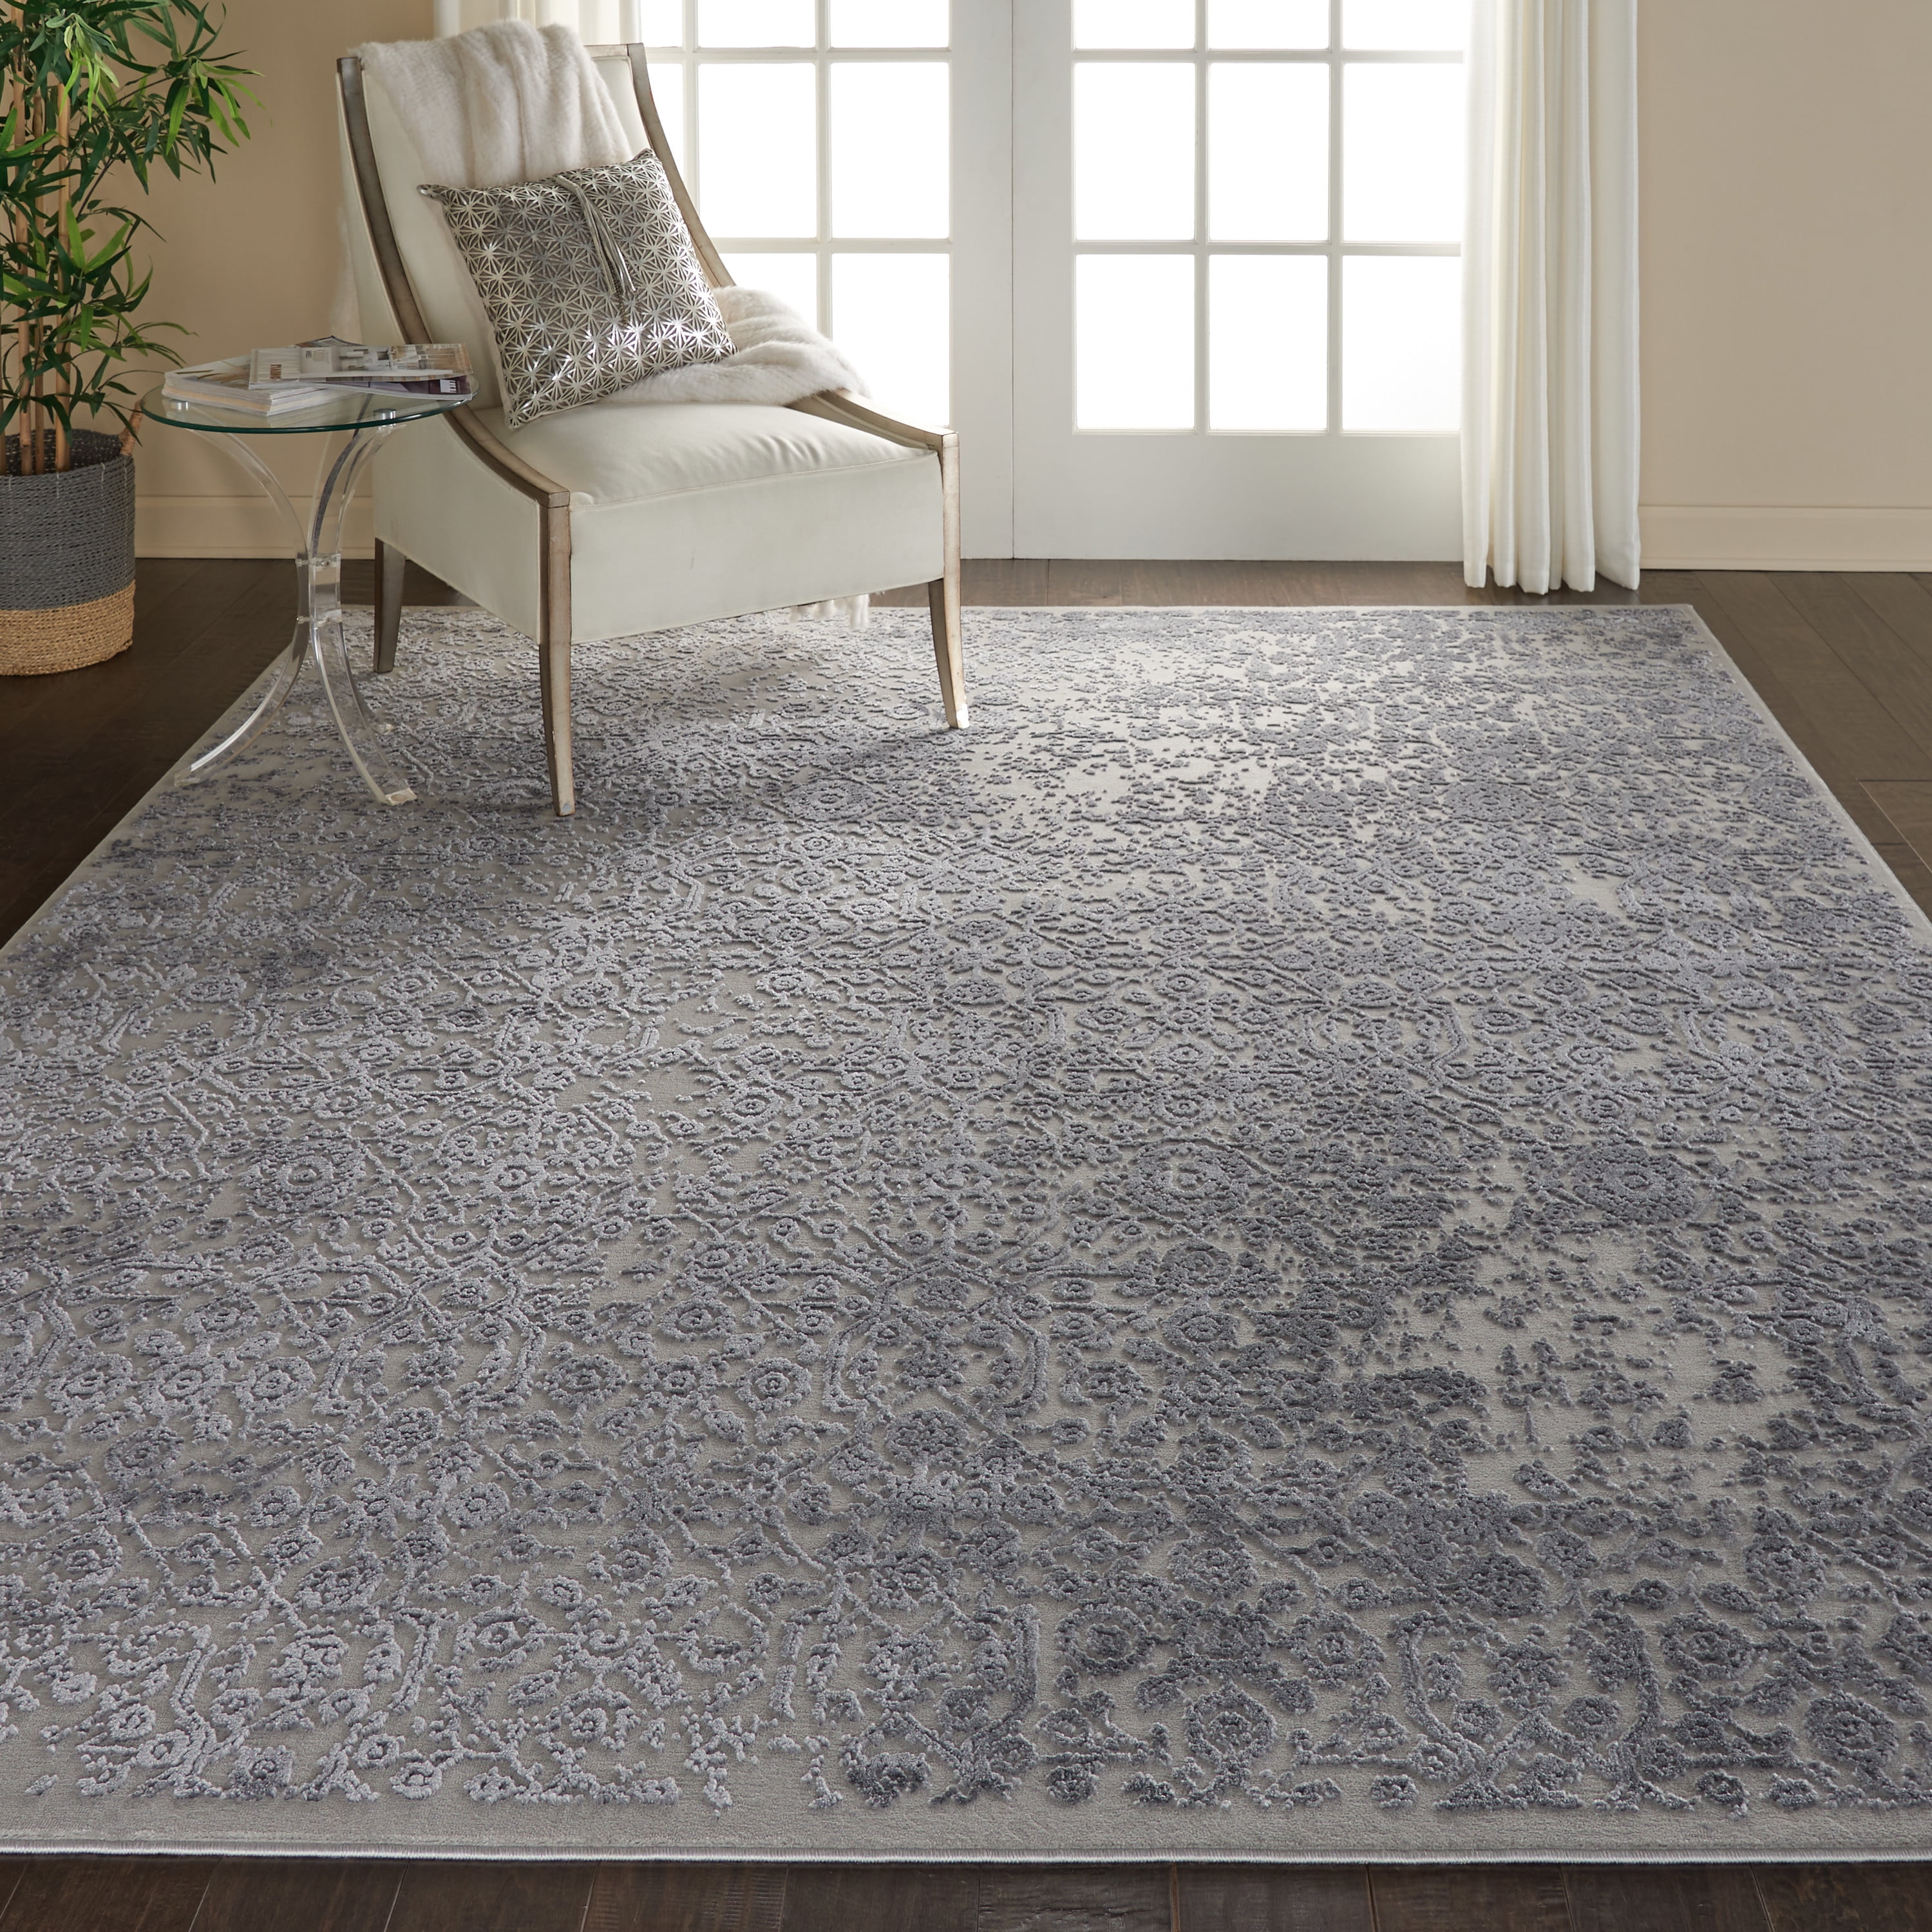 Slate Blue And Grey French Country, French Country Area Rugs